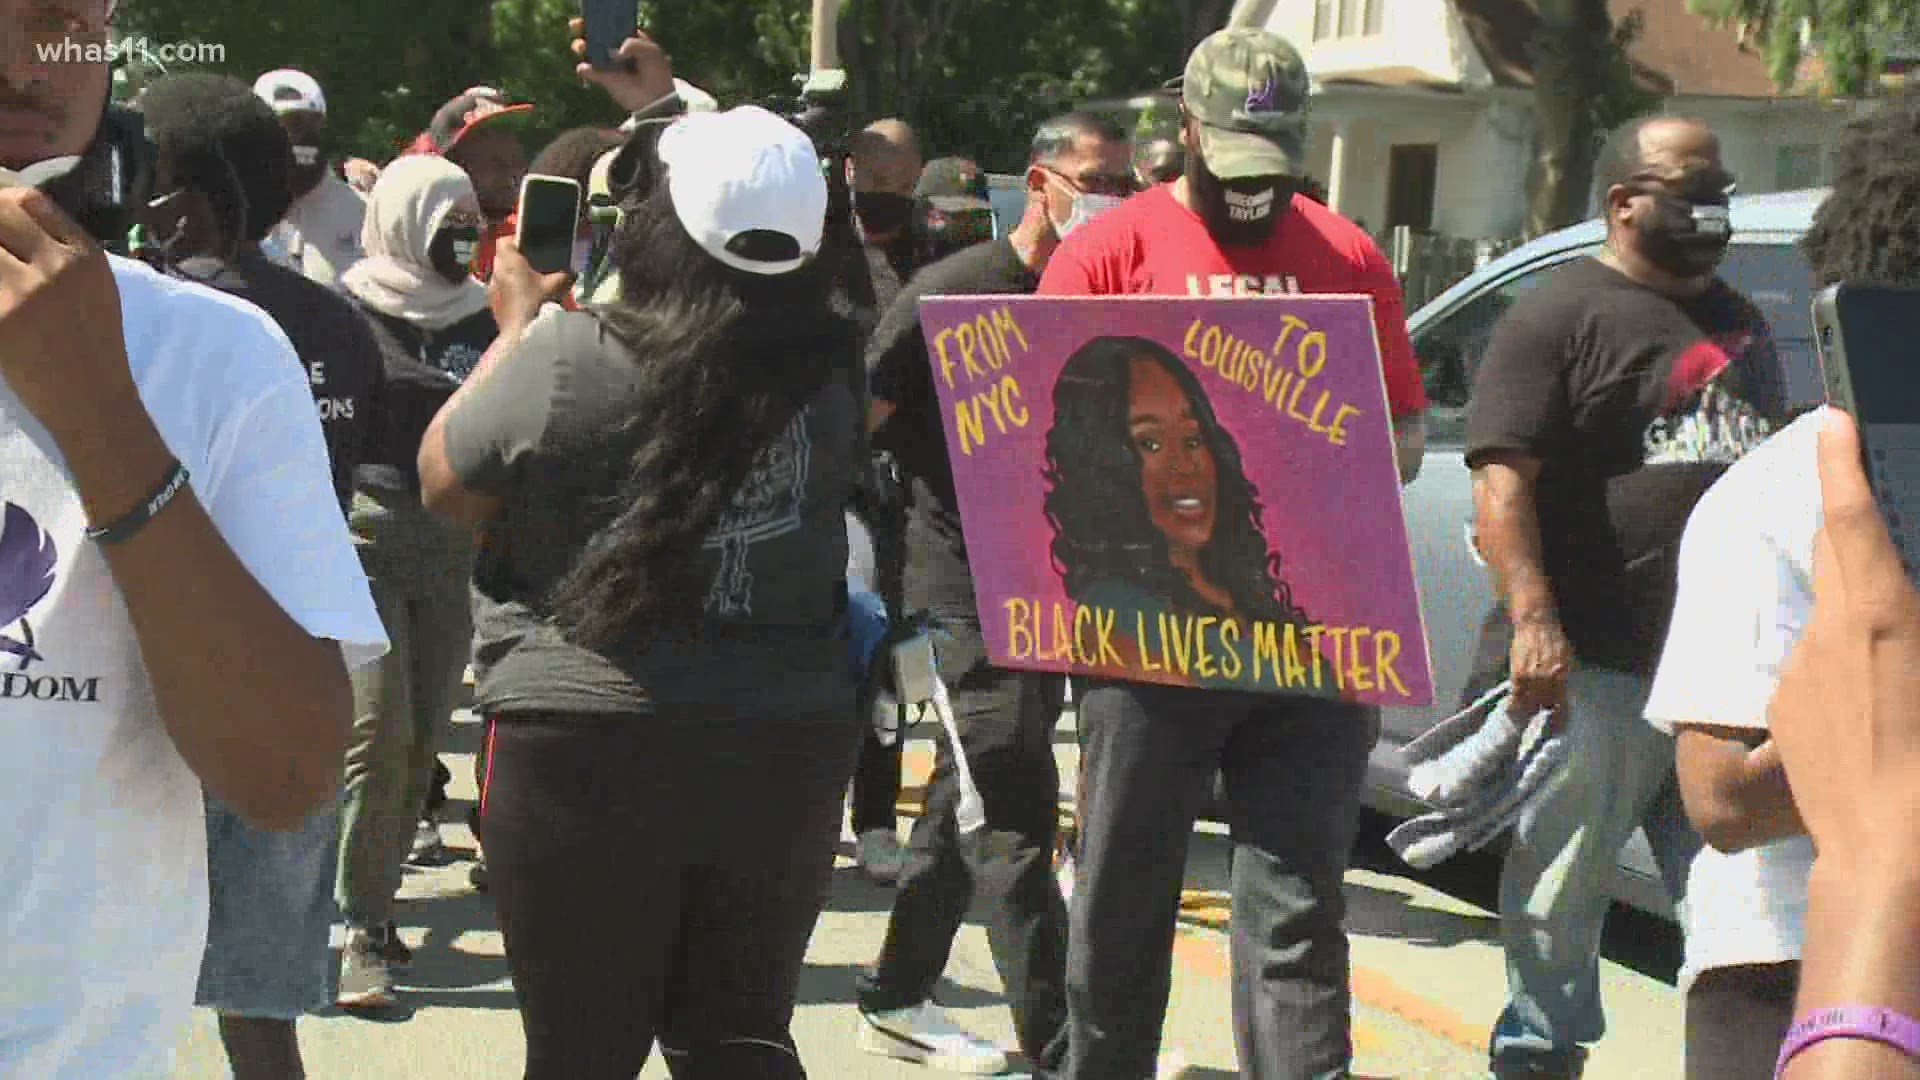 Crowds and protests are expected at Jefferson Square Park to mark one year since Breonna Taylor was shot and killed by Louisville police.